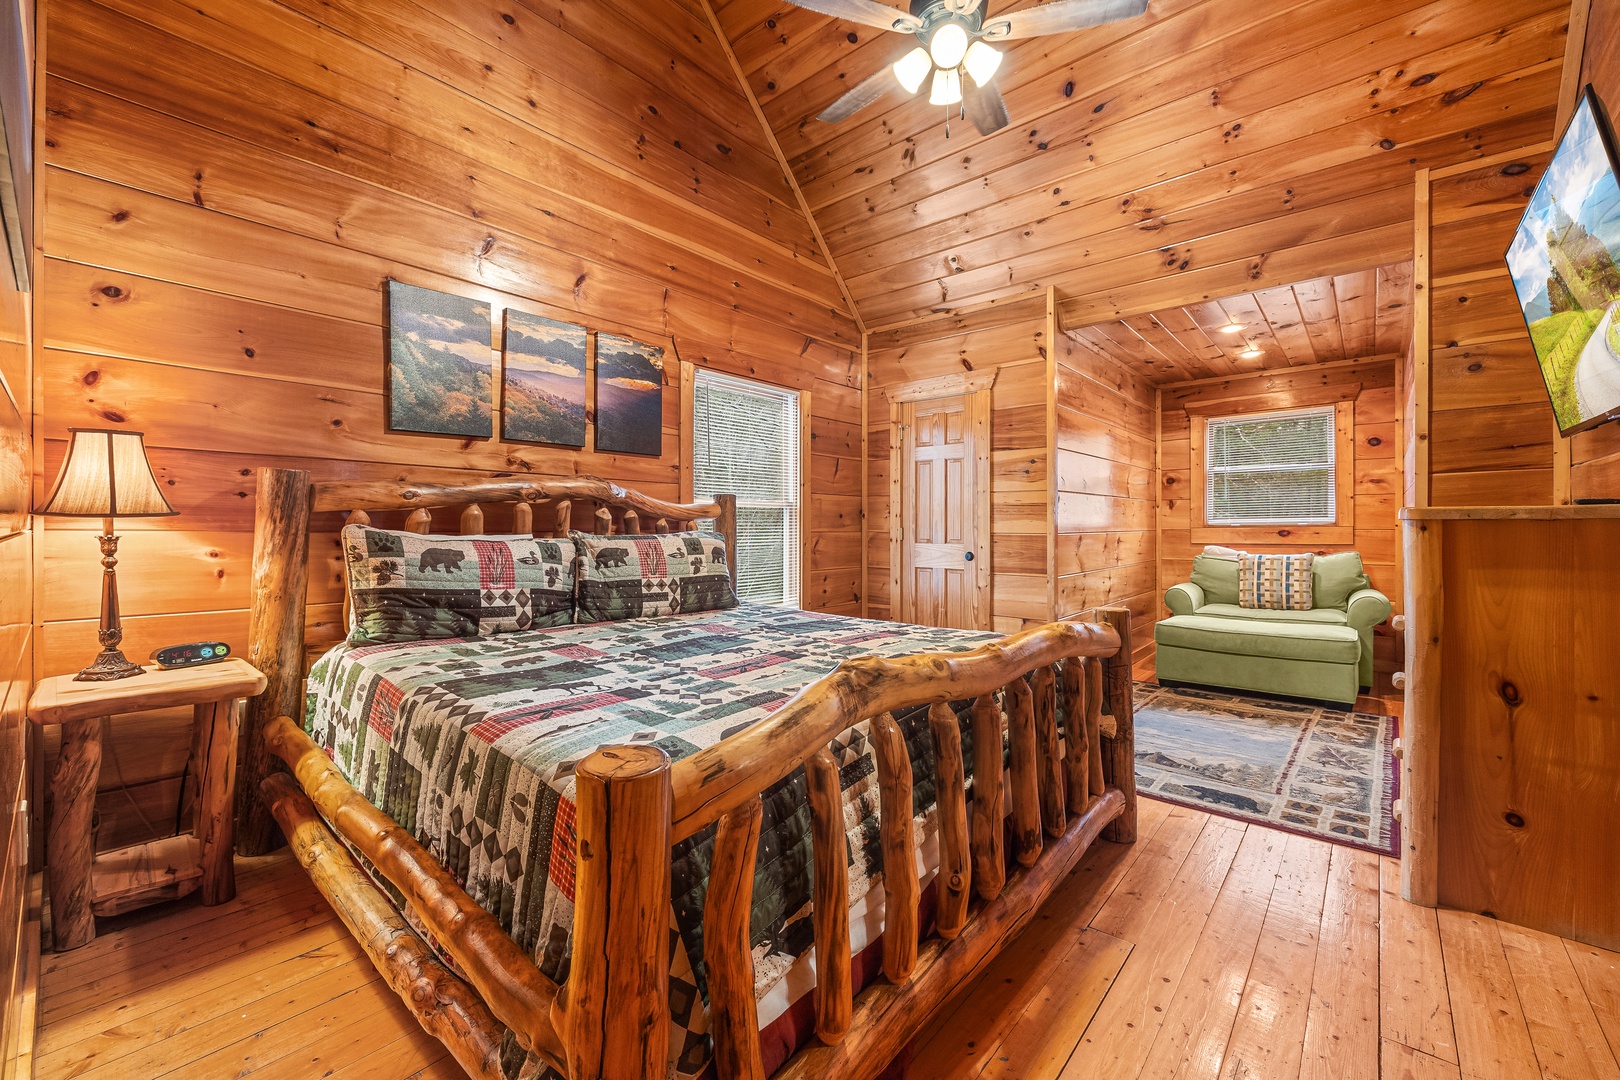 Bedroom with a log bed, night stand, lamp, and loveseat at Moonshine Memories, a 2 bedroom cabin rental located in Gatlinburg